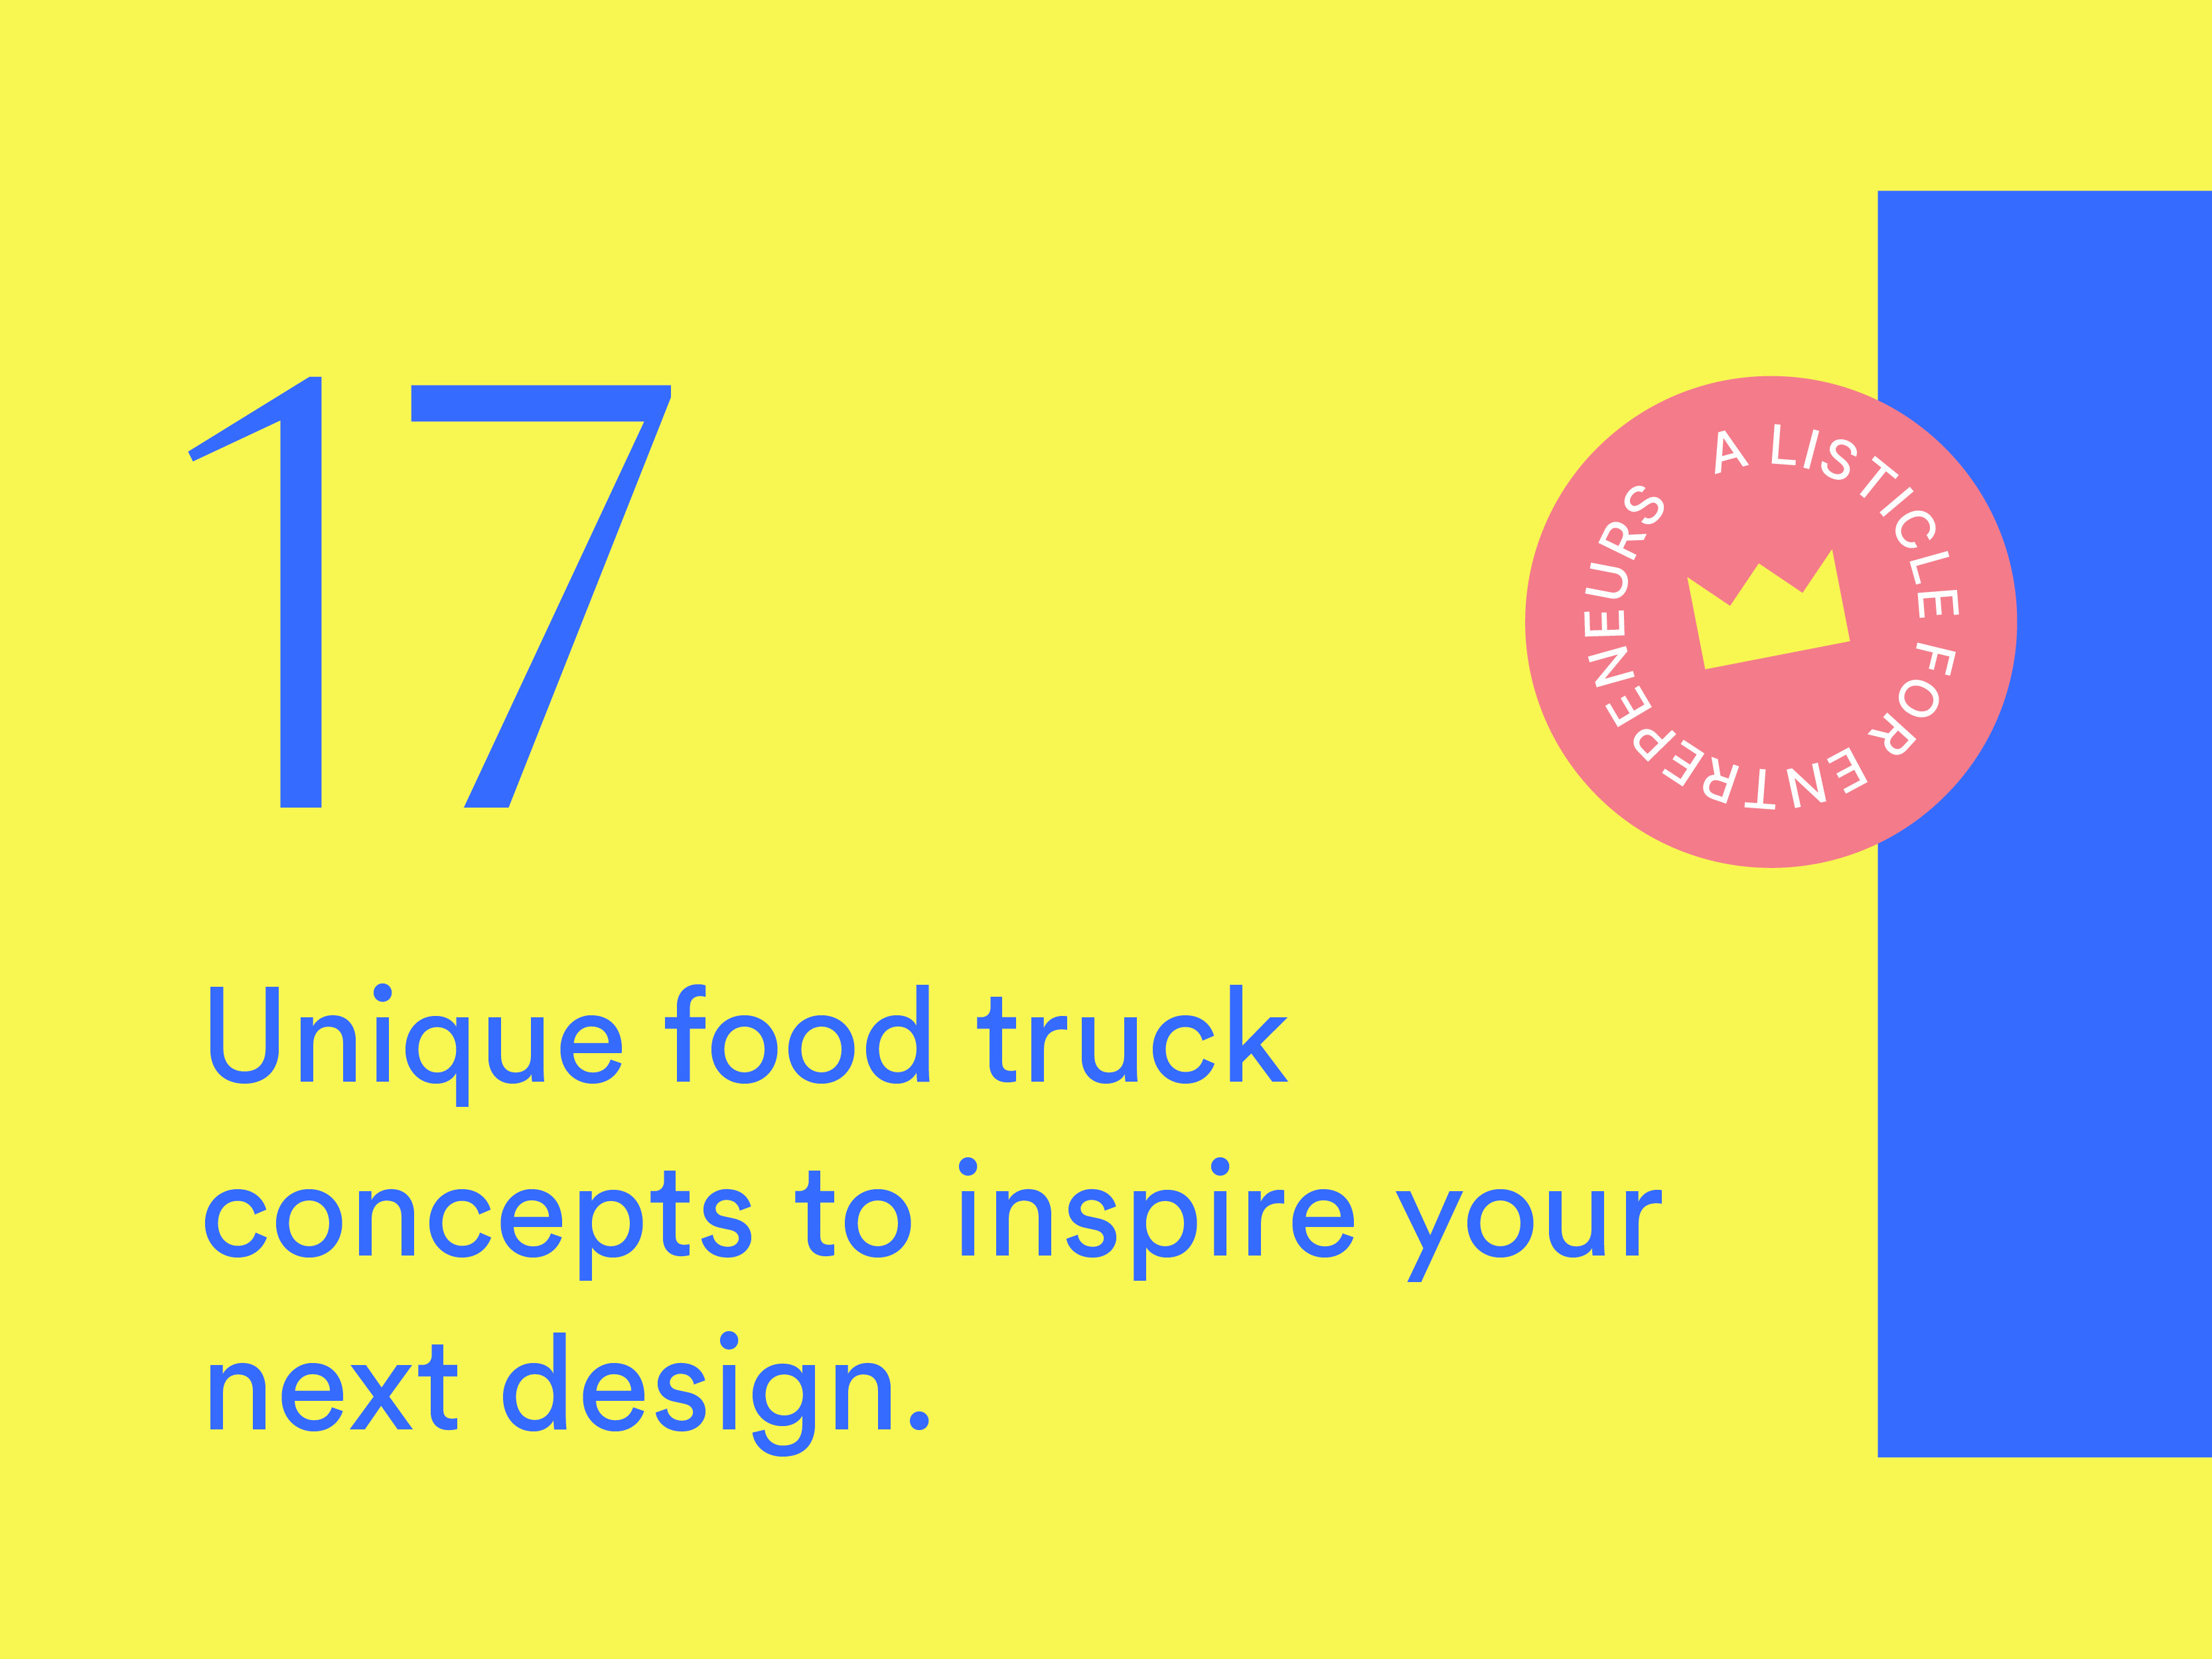 17 Food truck concepts to take your designs to the next level.